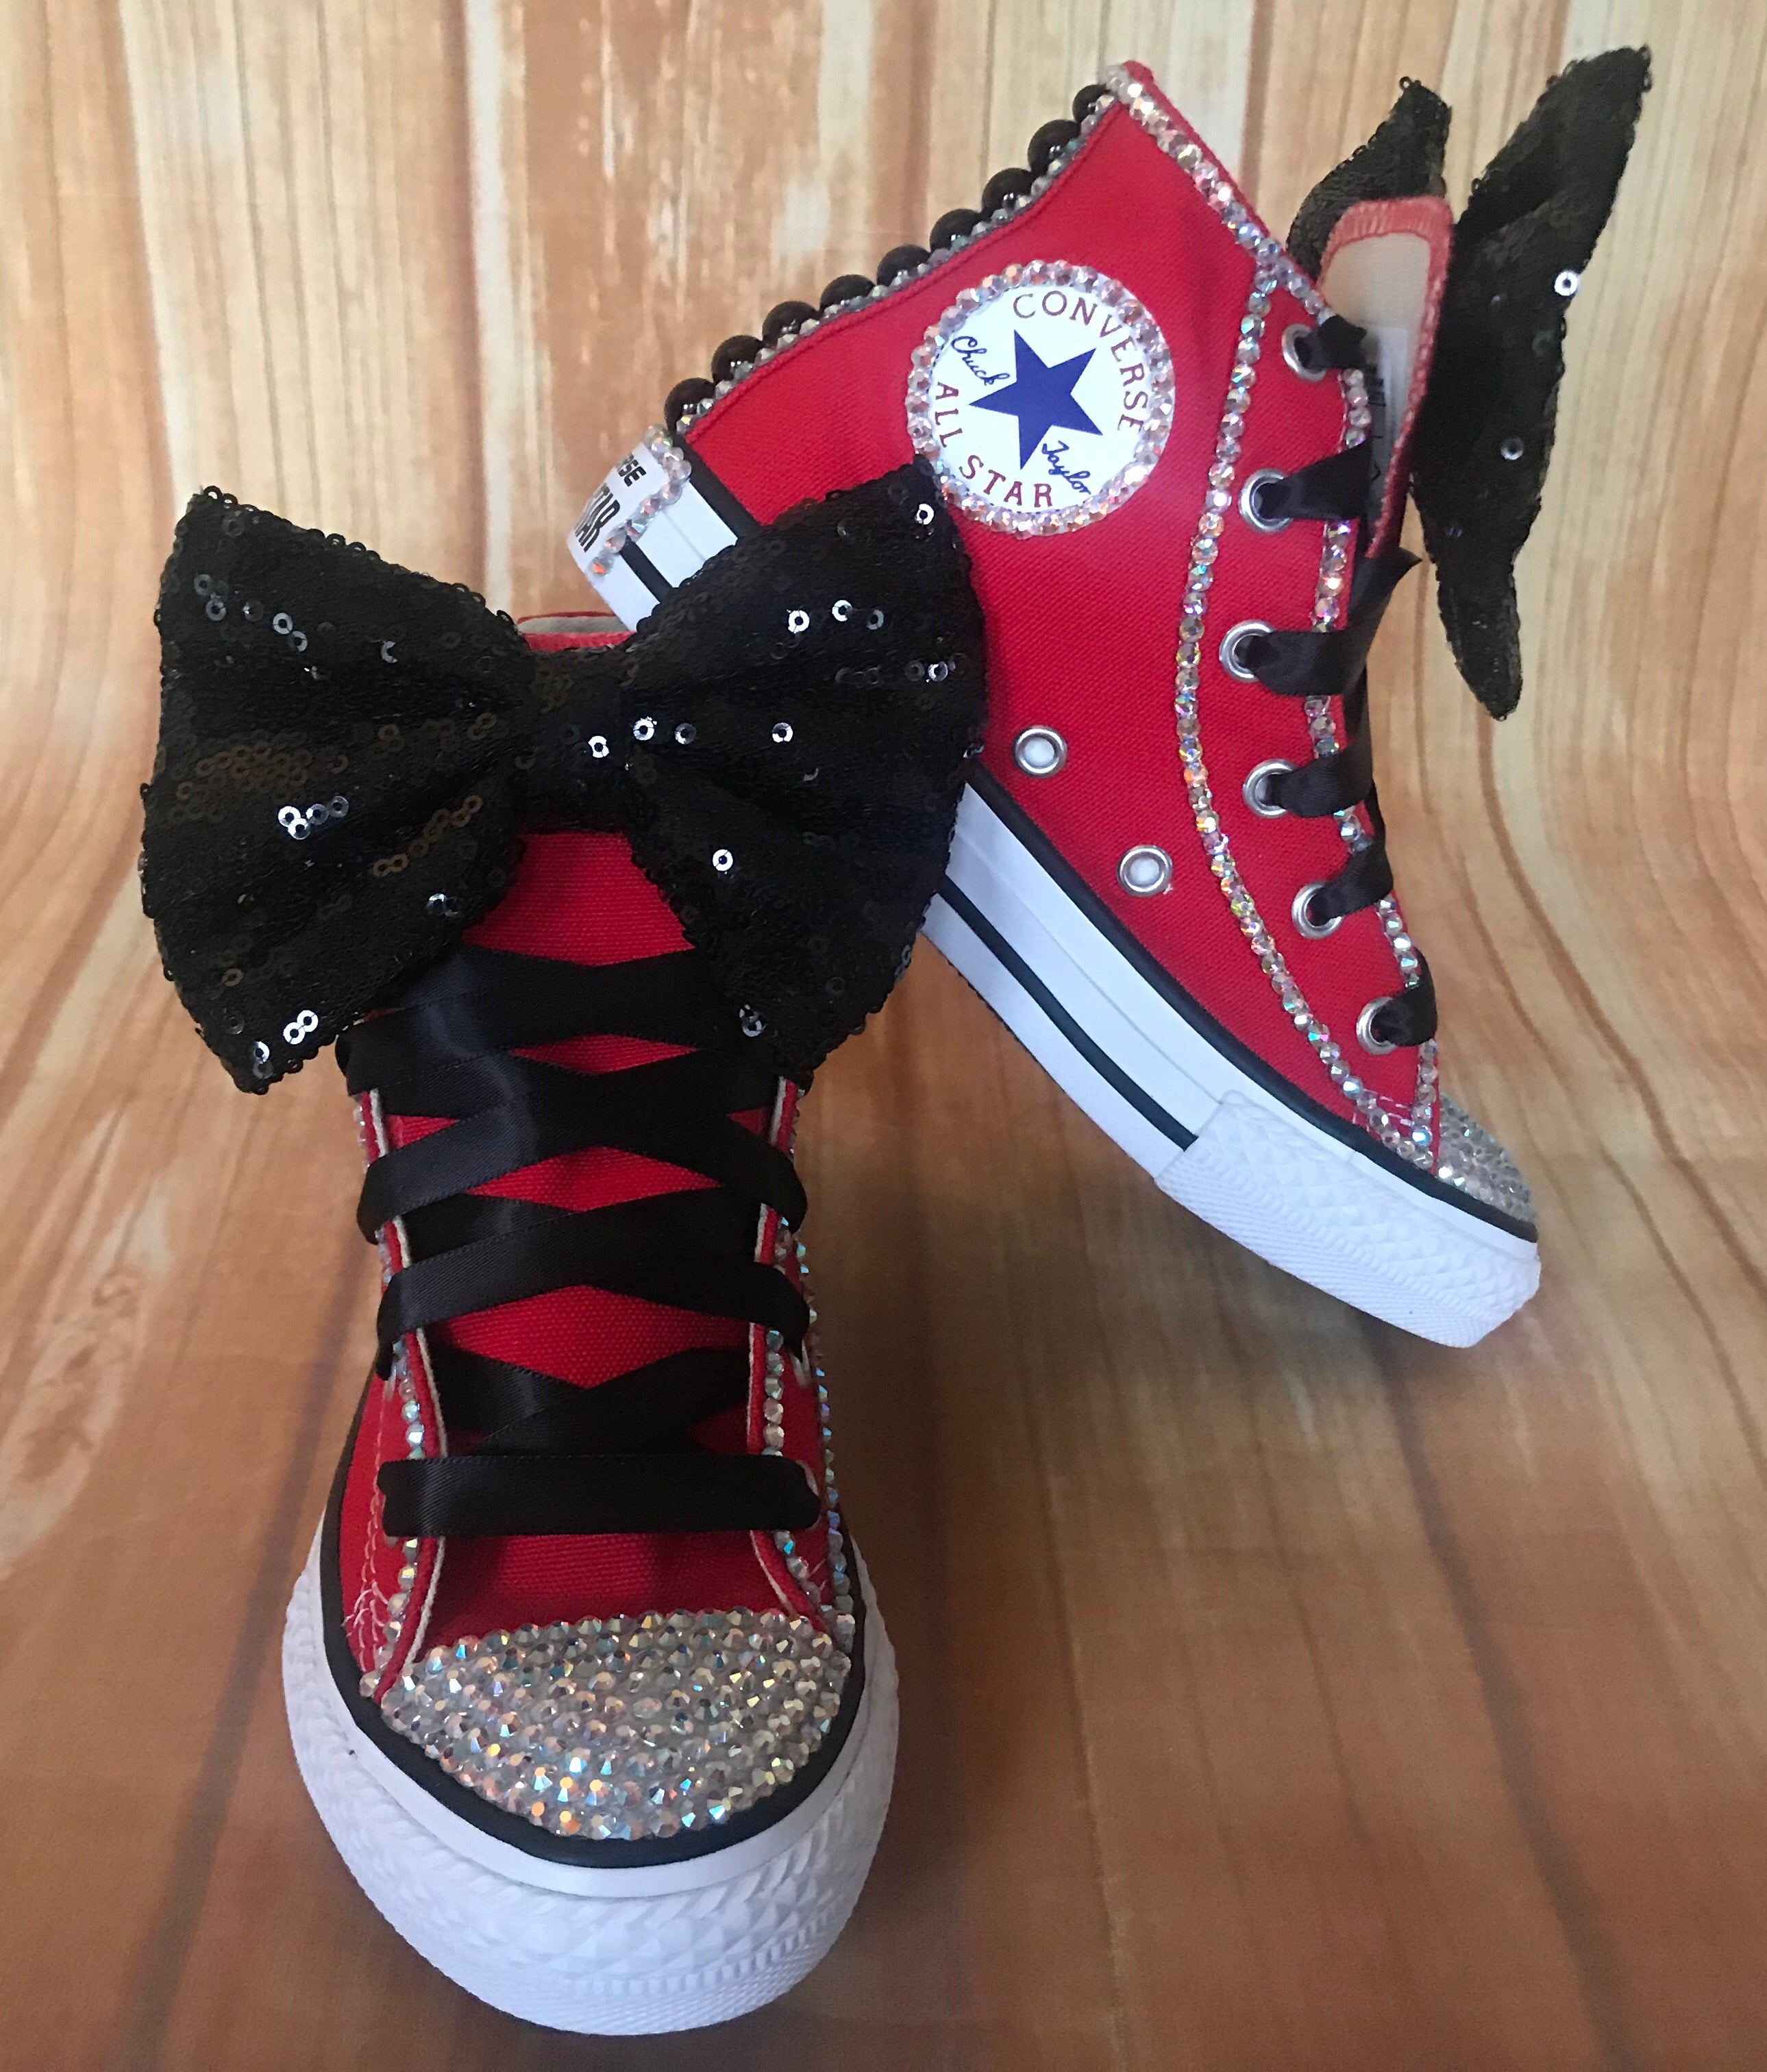 red converse size 10